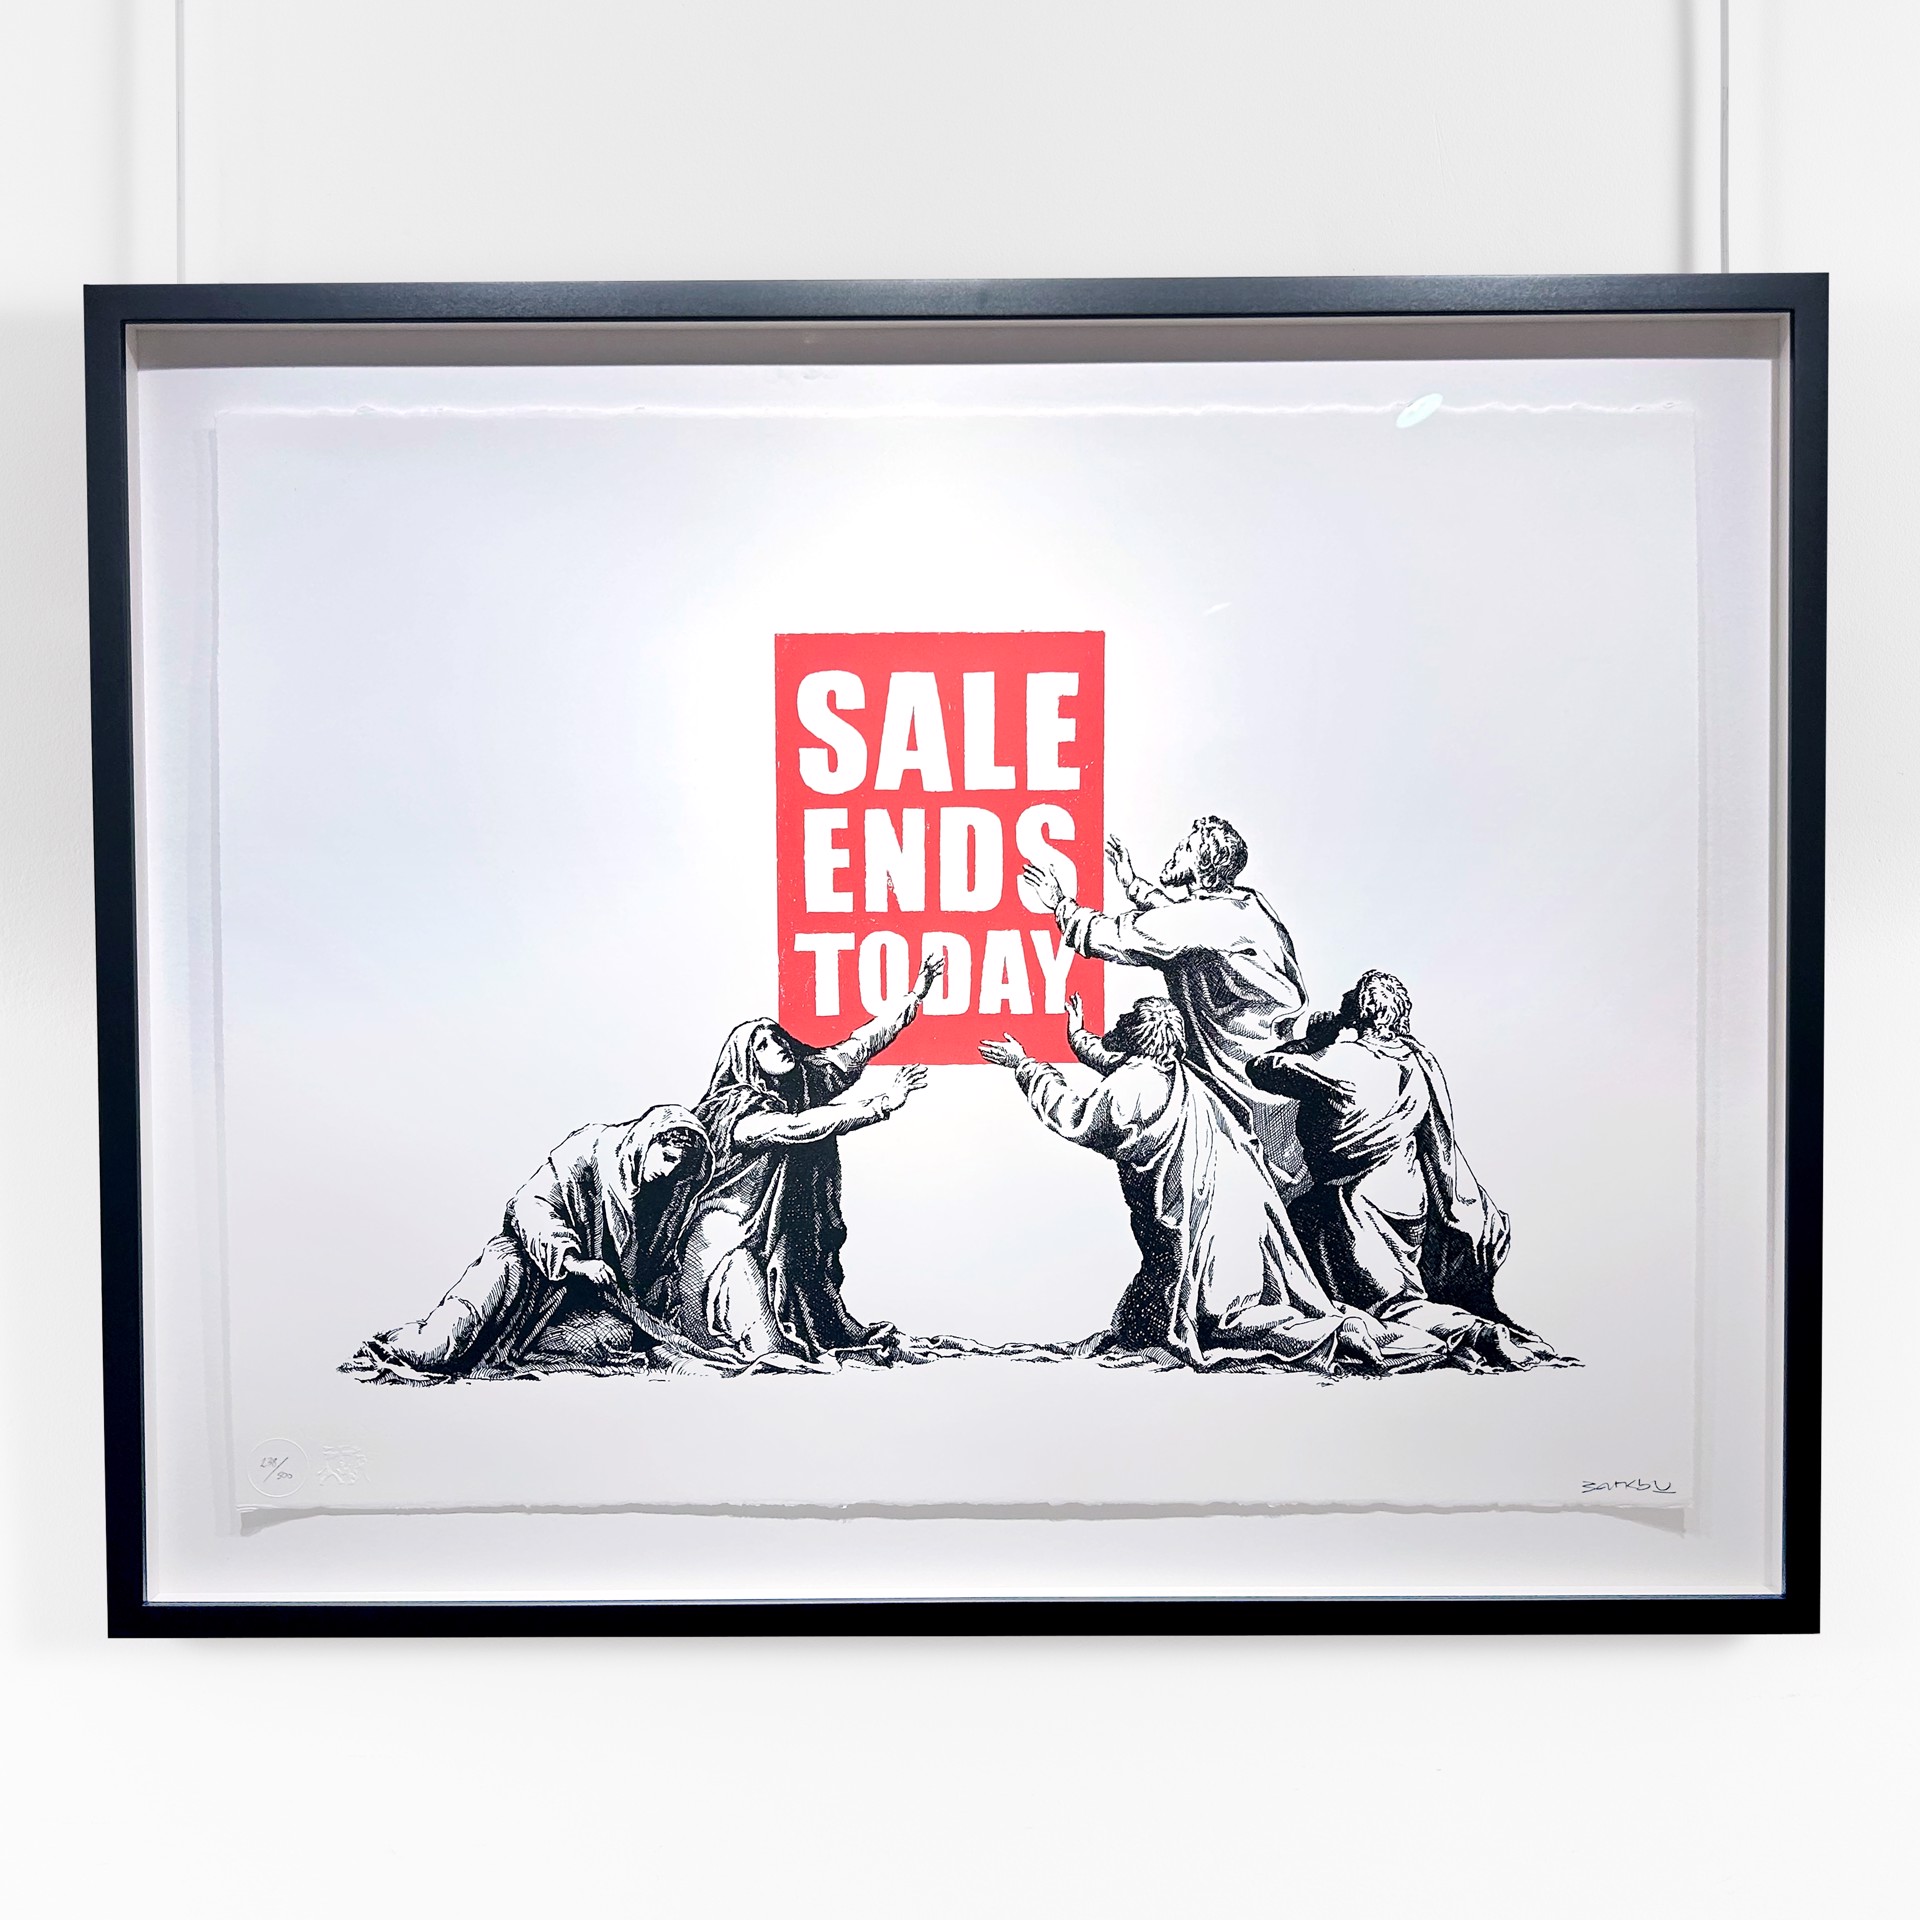 Sale Ends Today (V2) by Banksy